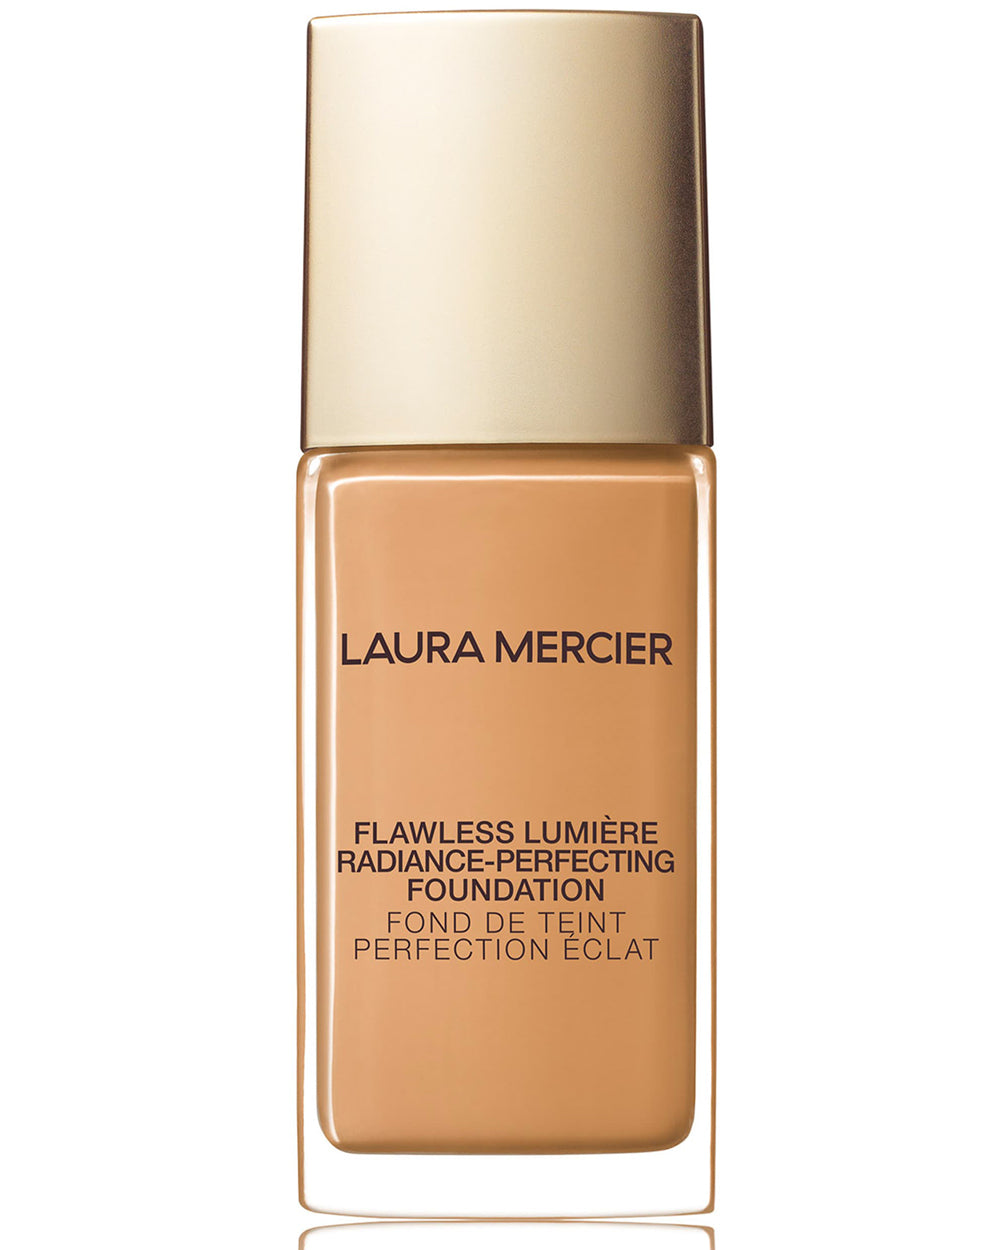 Flawless Lumiere Foundation in 2N2 Linen